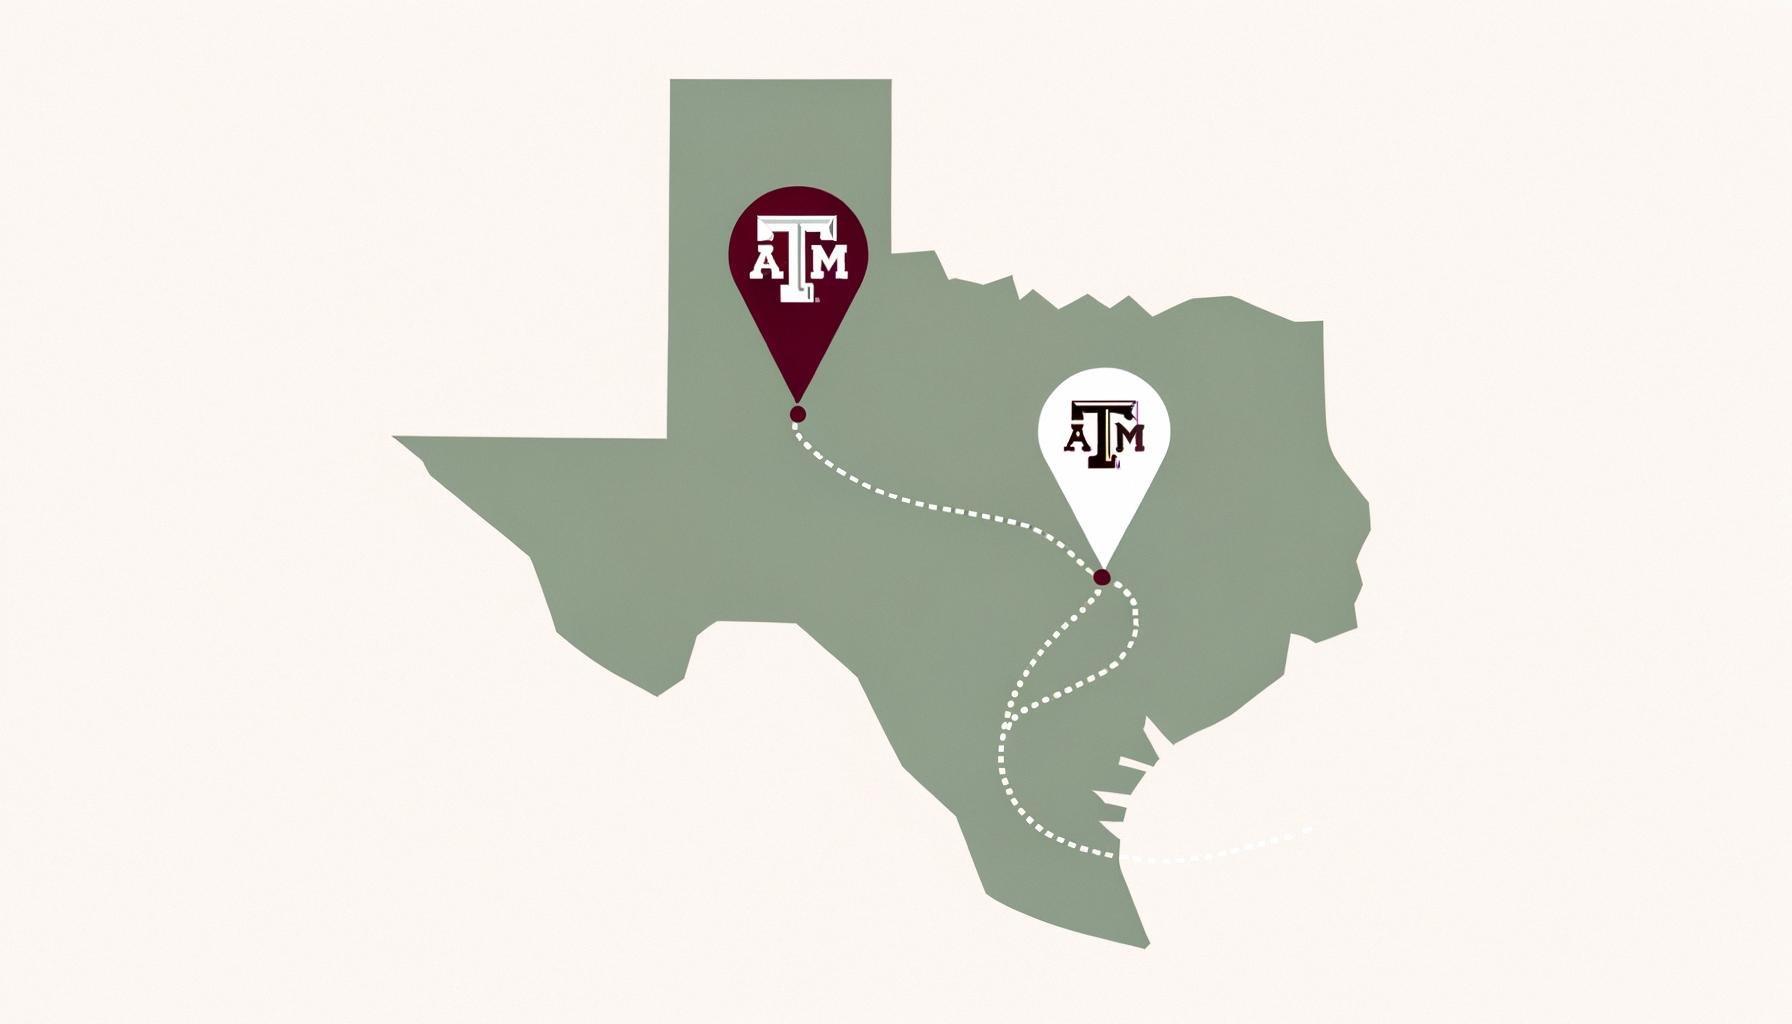 Jim Schlossnagle moves from Texas A&M to Texas